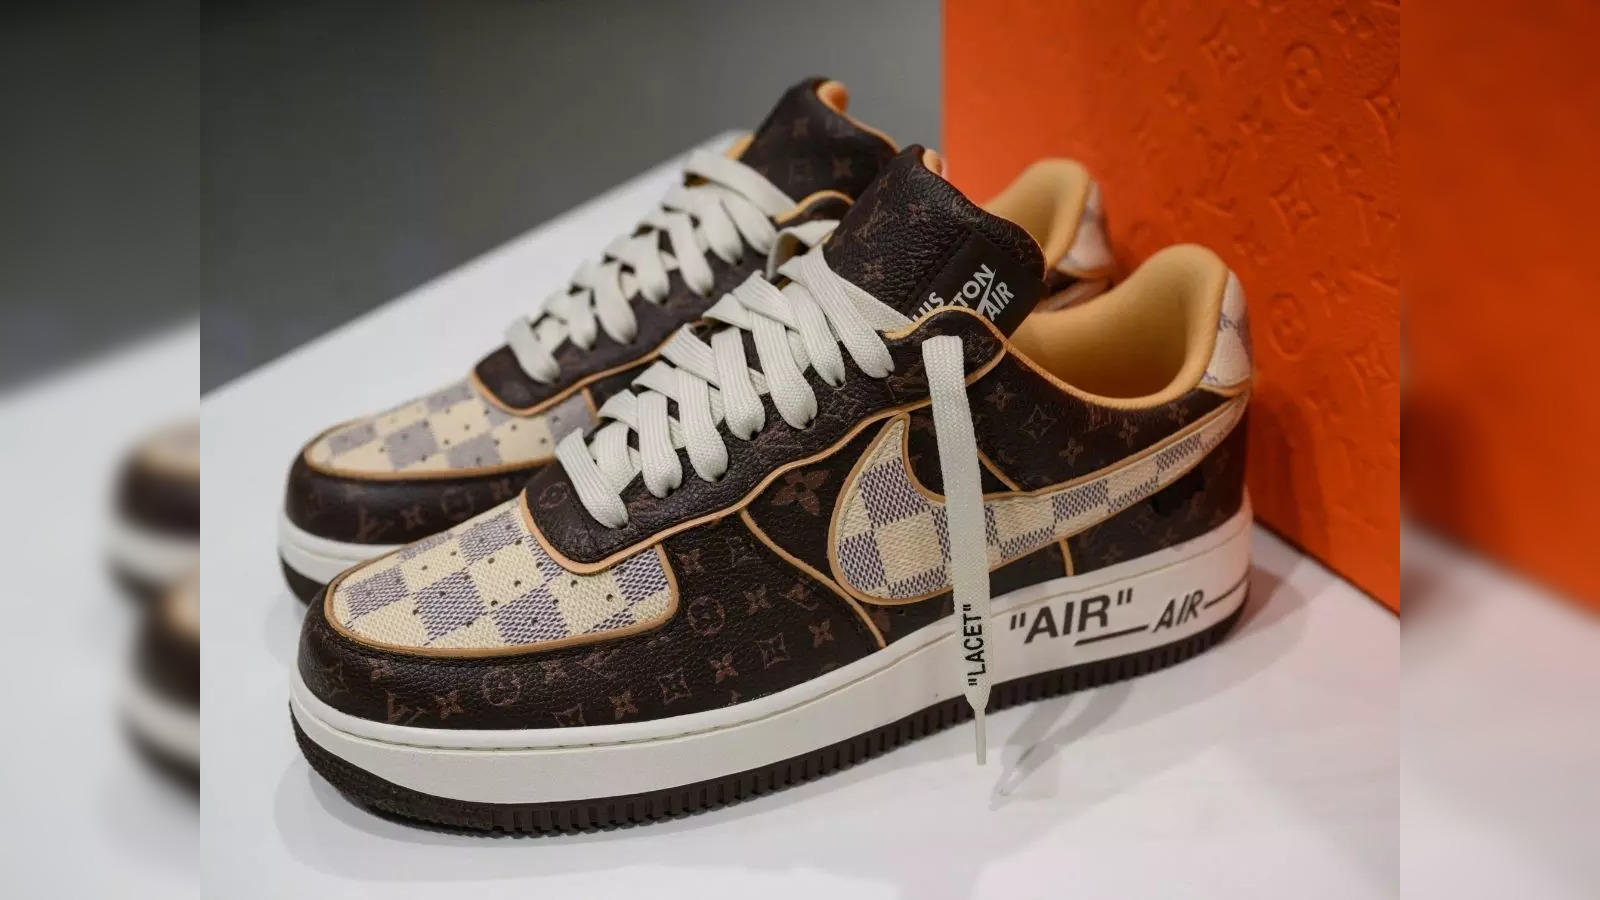 200 pairs of Louis Vuitton x Nike 'Air Force 1' shoes designed by